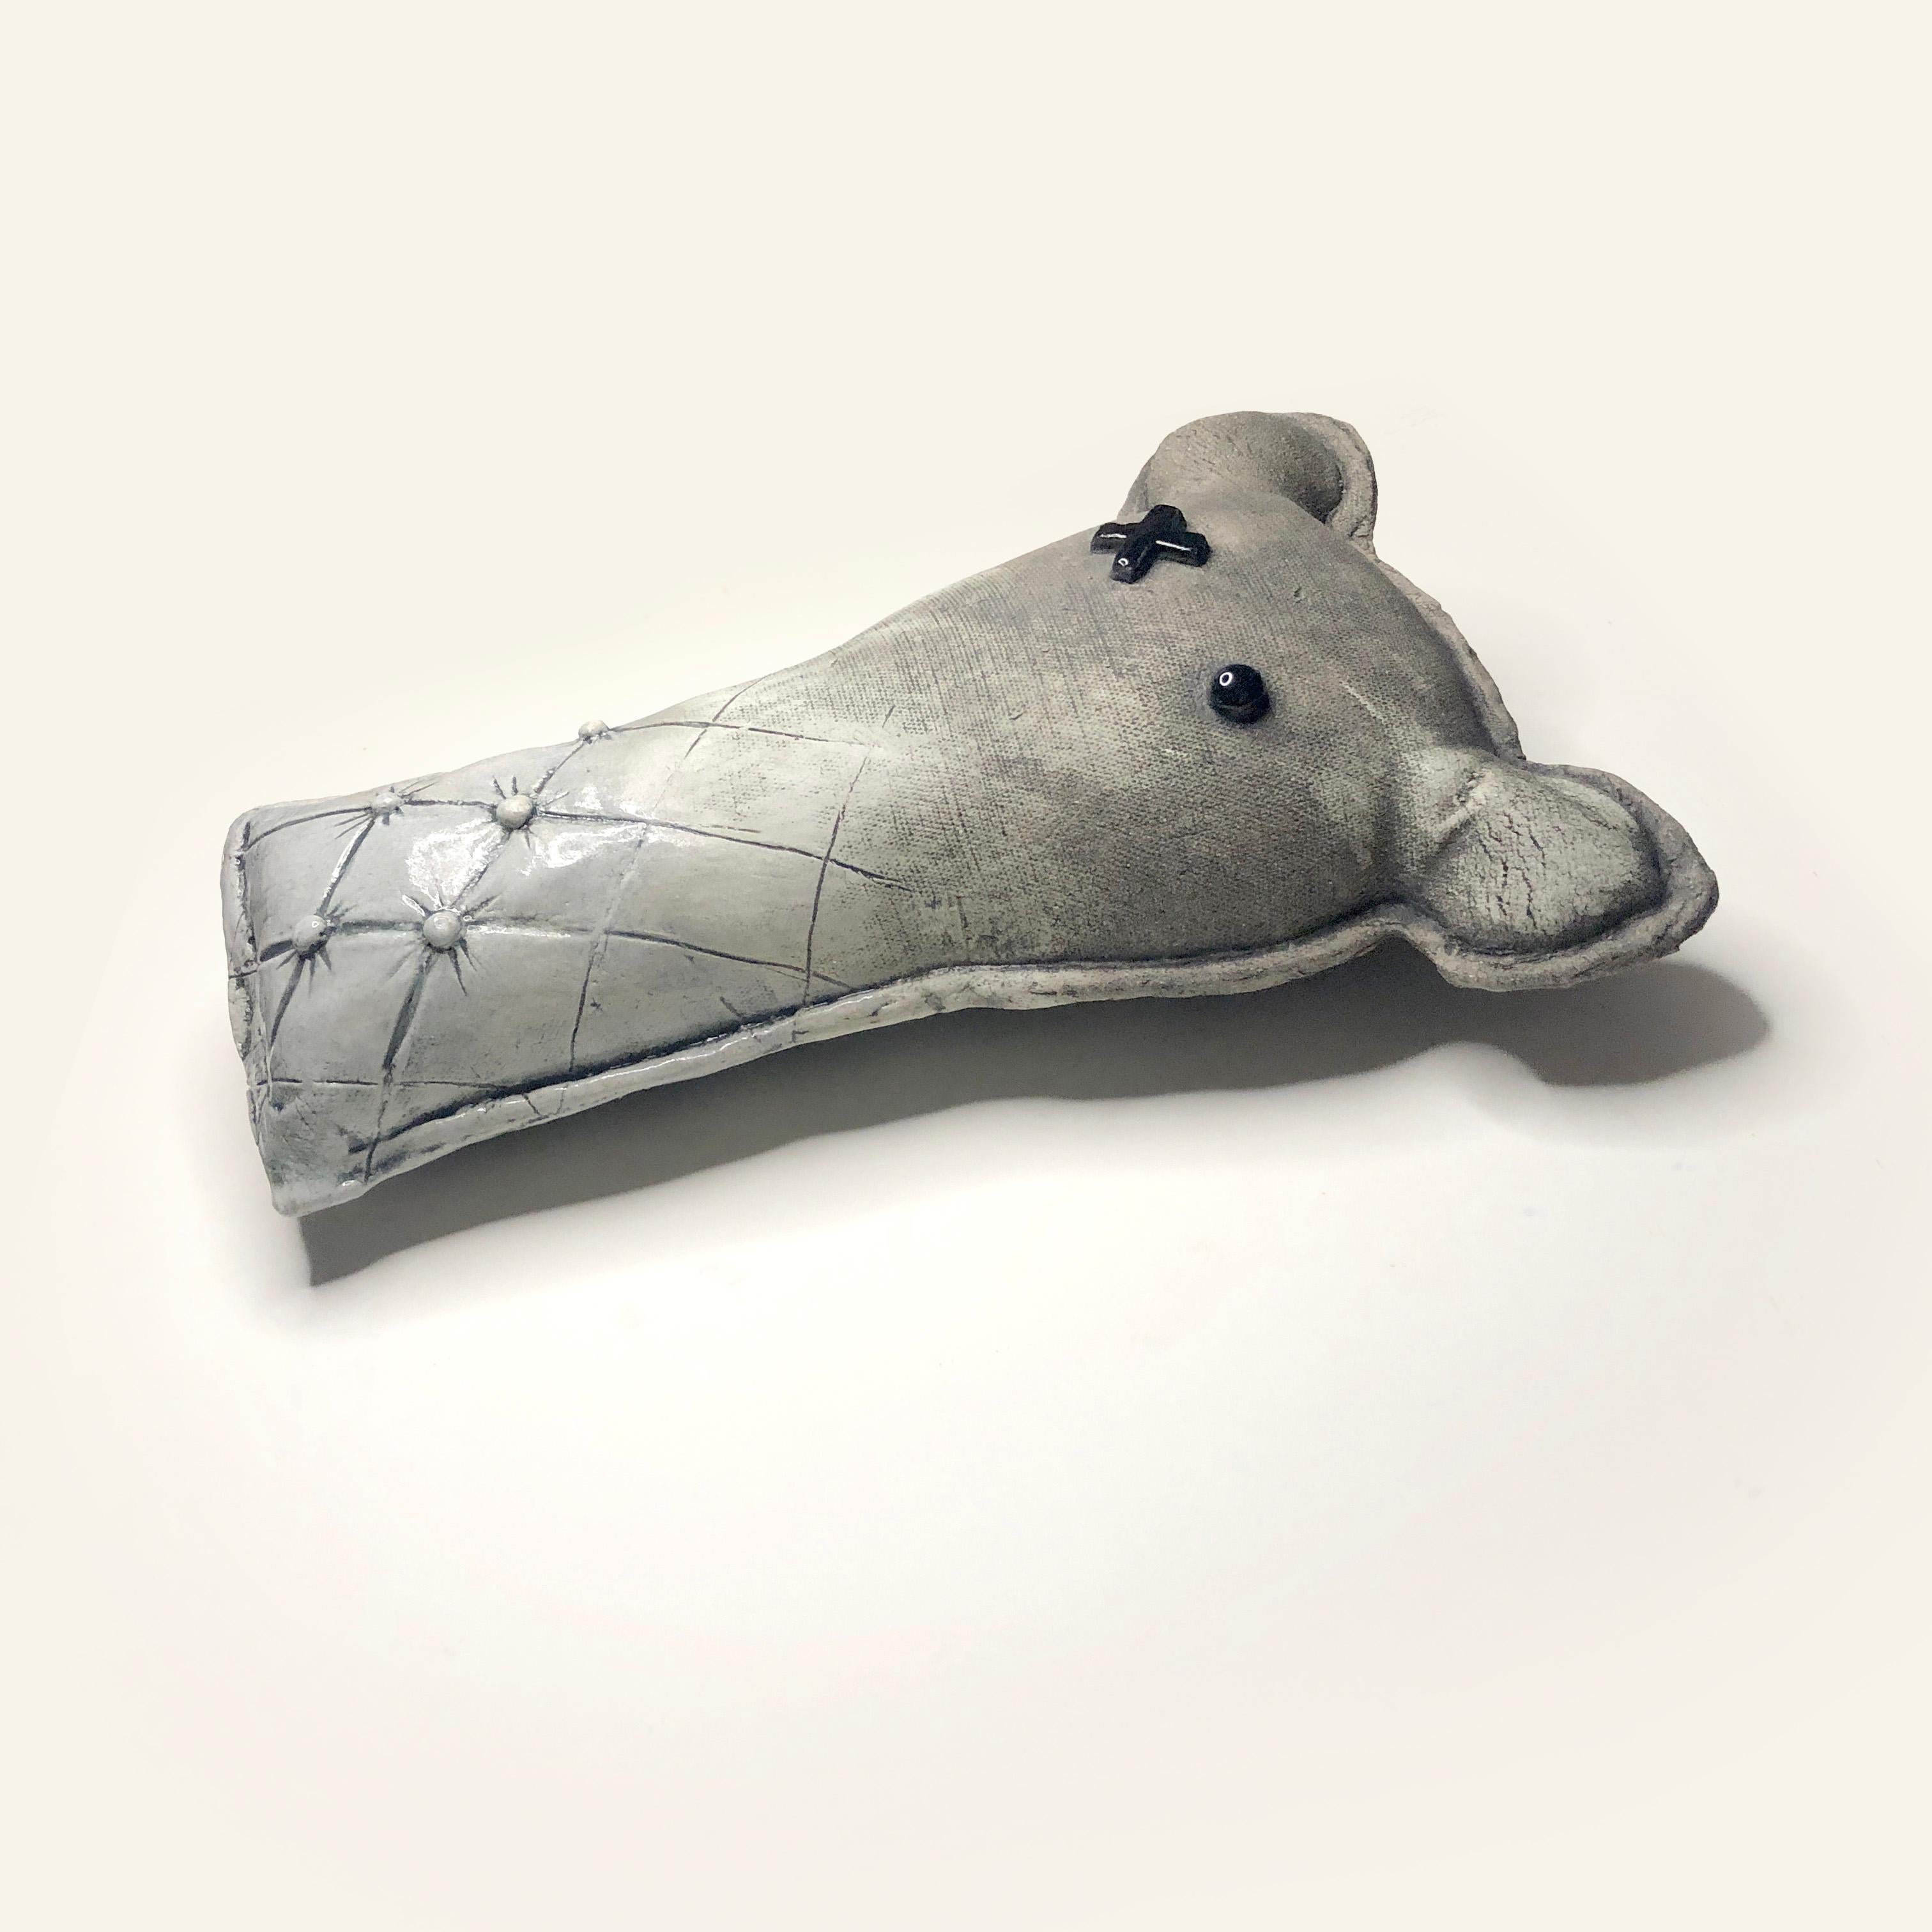 Introducing Théodor Gerald I or simply Teddy G, another cuddly ceramic teddy bear in chic grey and white. Fitting perfect in a modern interior. 

Combining contemporary aesthetics with a touch of rebellion and  urban charm. Crafted by the skilled